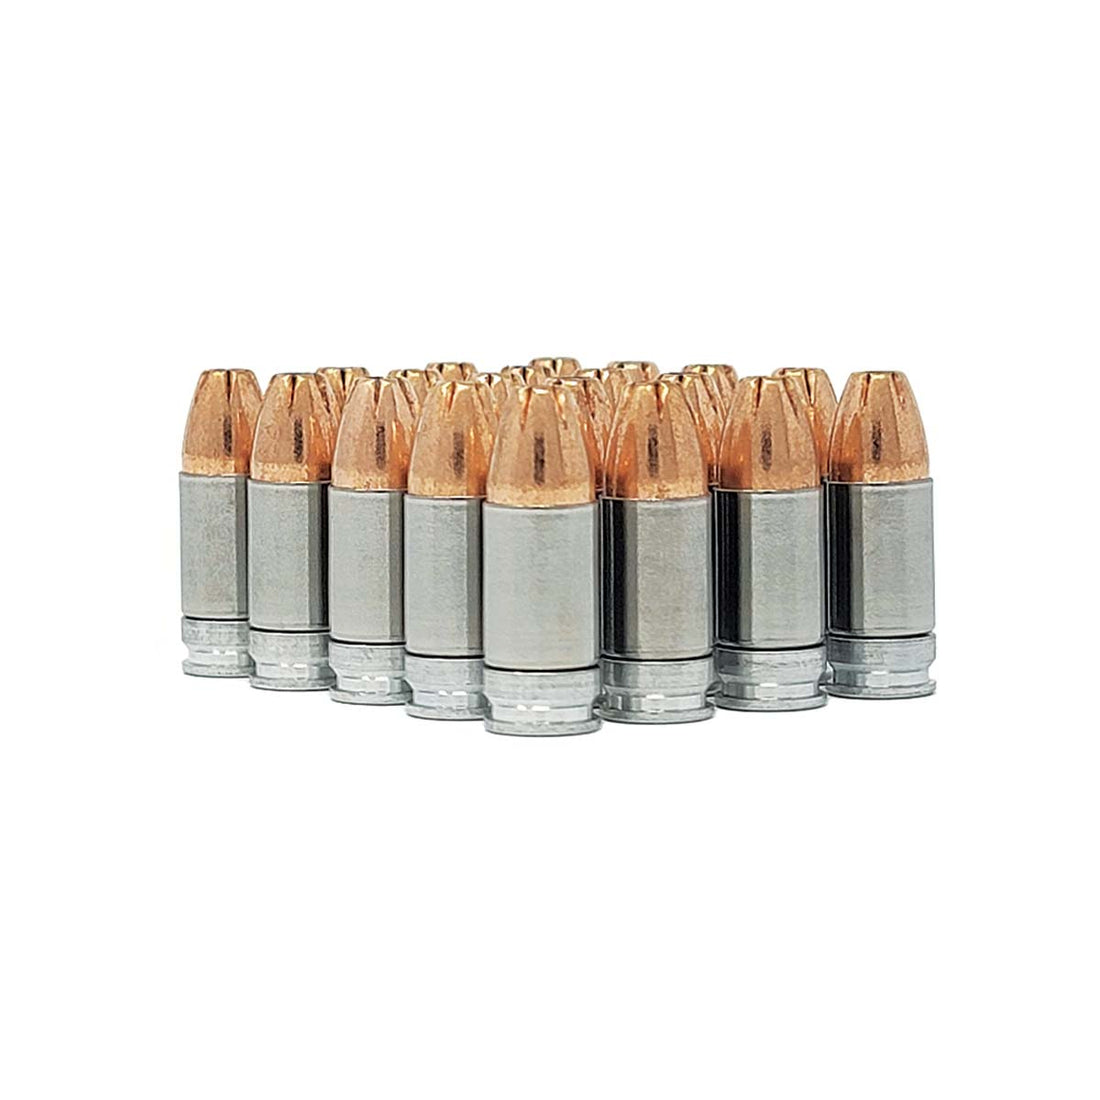 9mm Shell Shock Cartridge, 115 Grain, Jacketed Hollow Point (20 rounds)